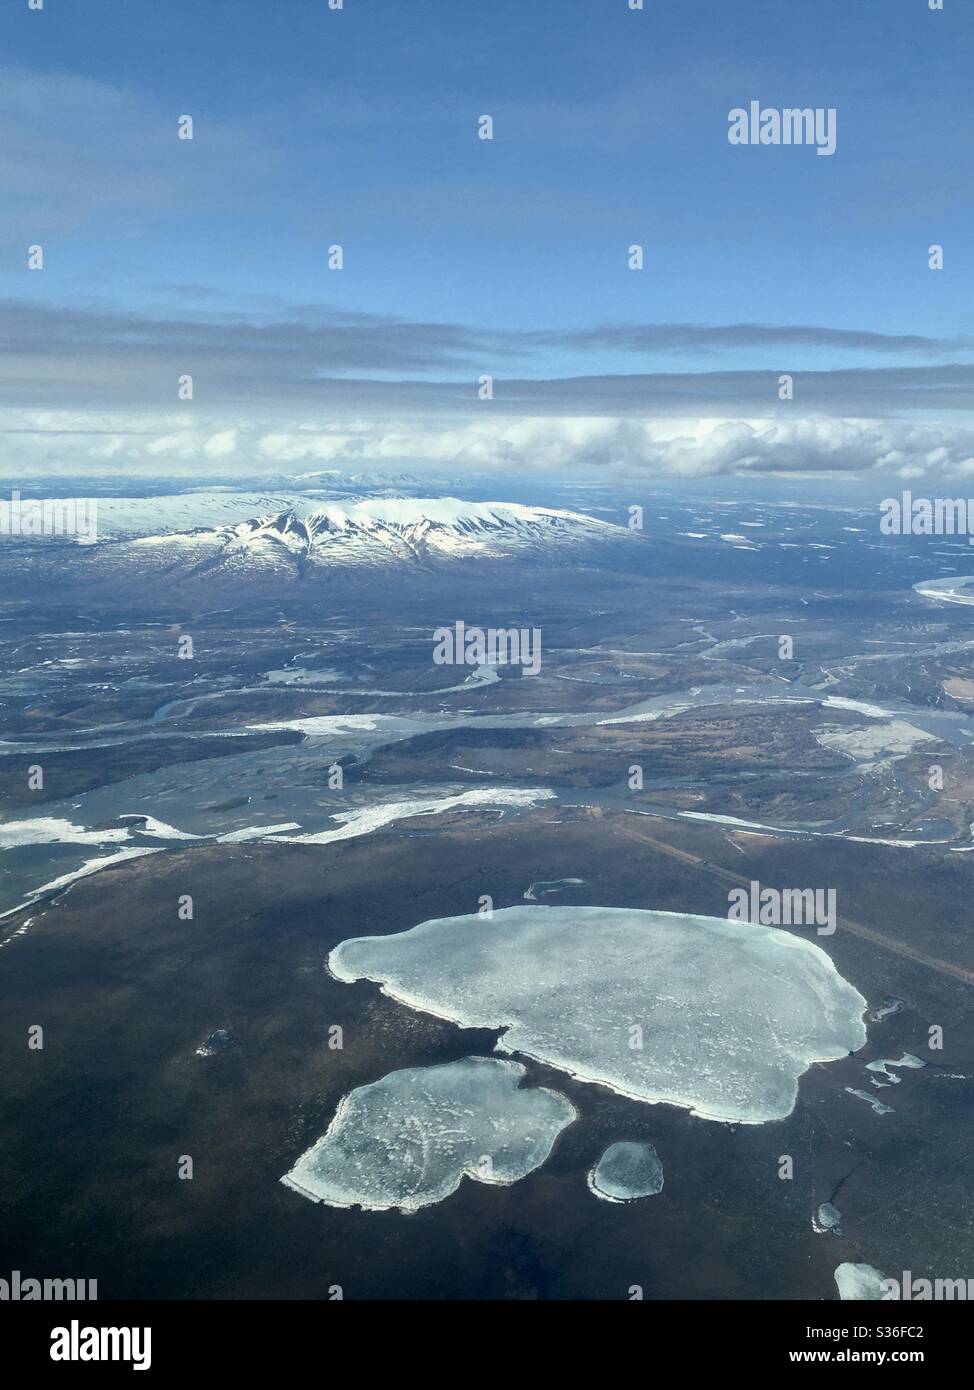 Aerial image of wild areas to the west of Anchorage, Alaska, with the ‘Sleeping Lady’ mountains in the distance. Stock Photo